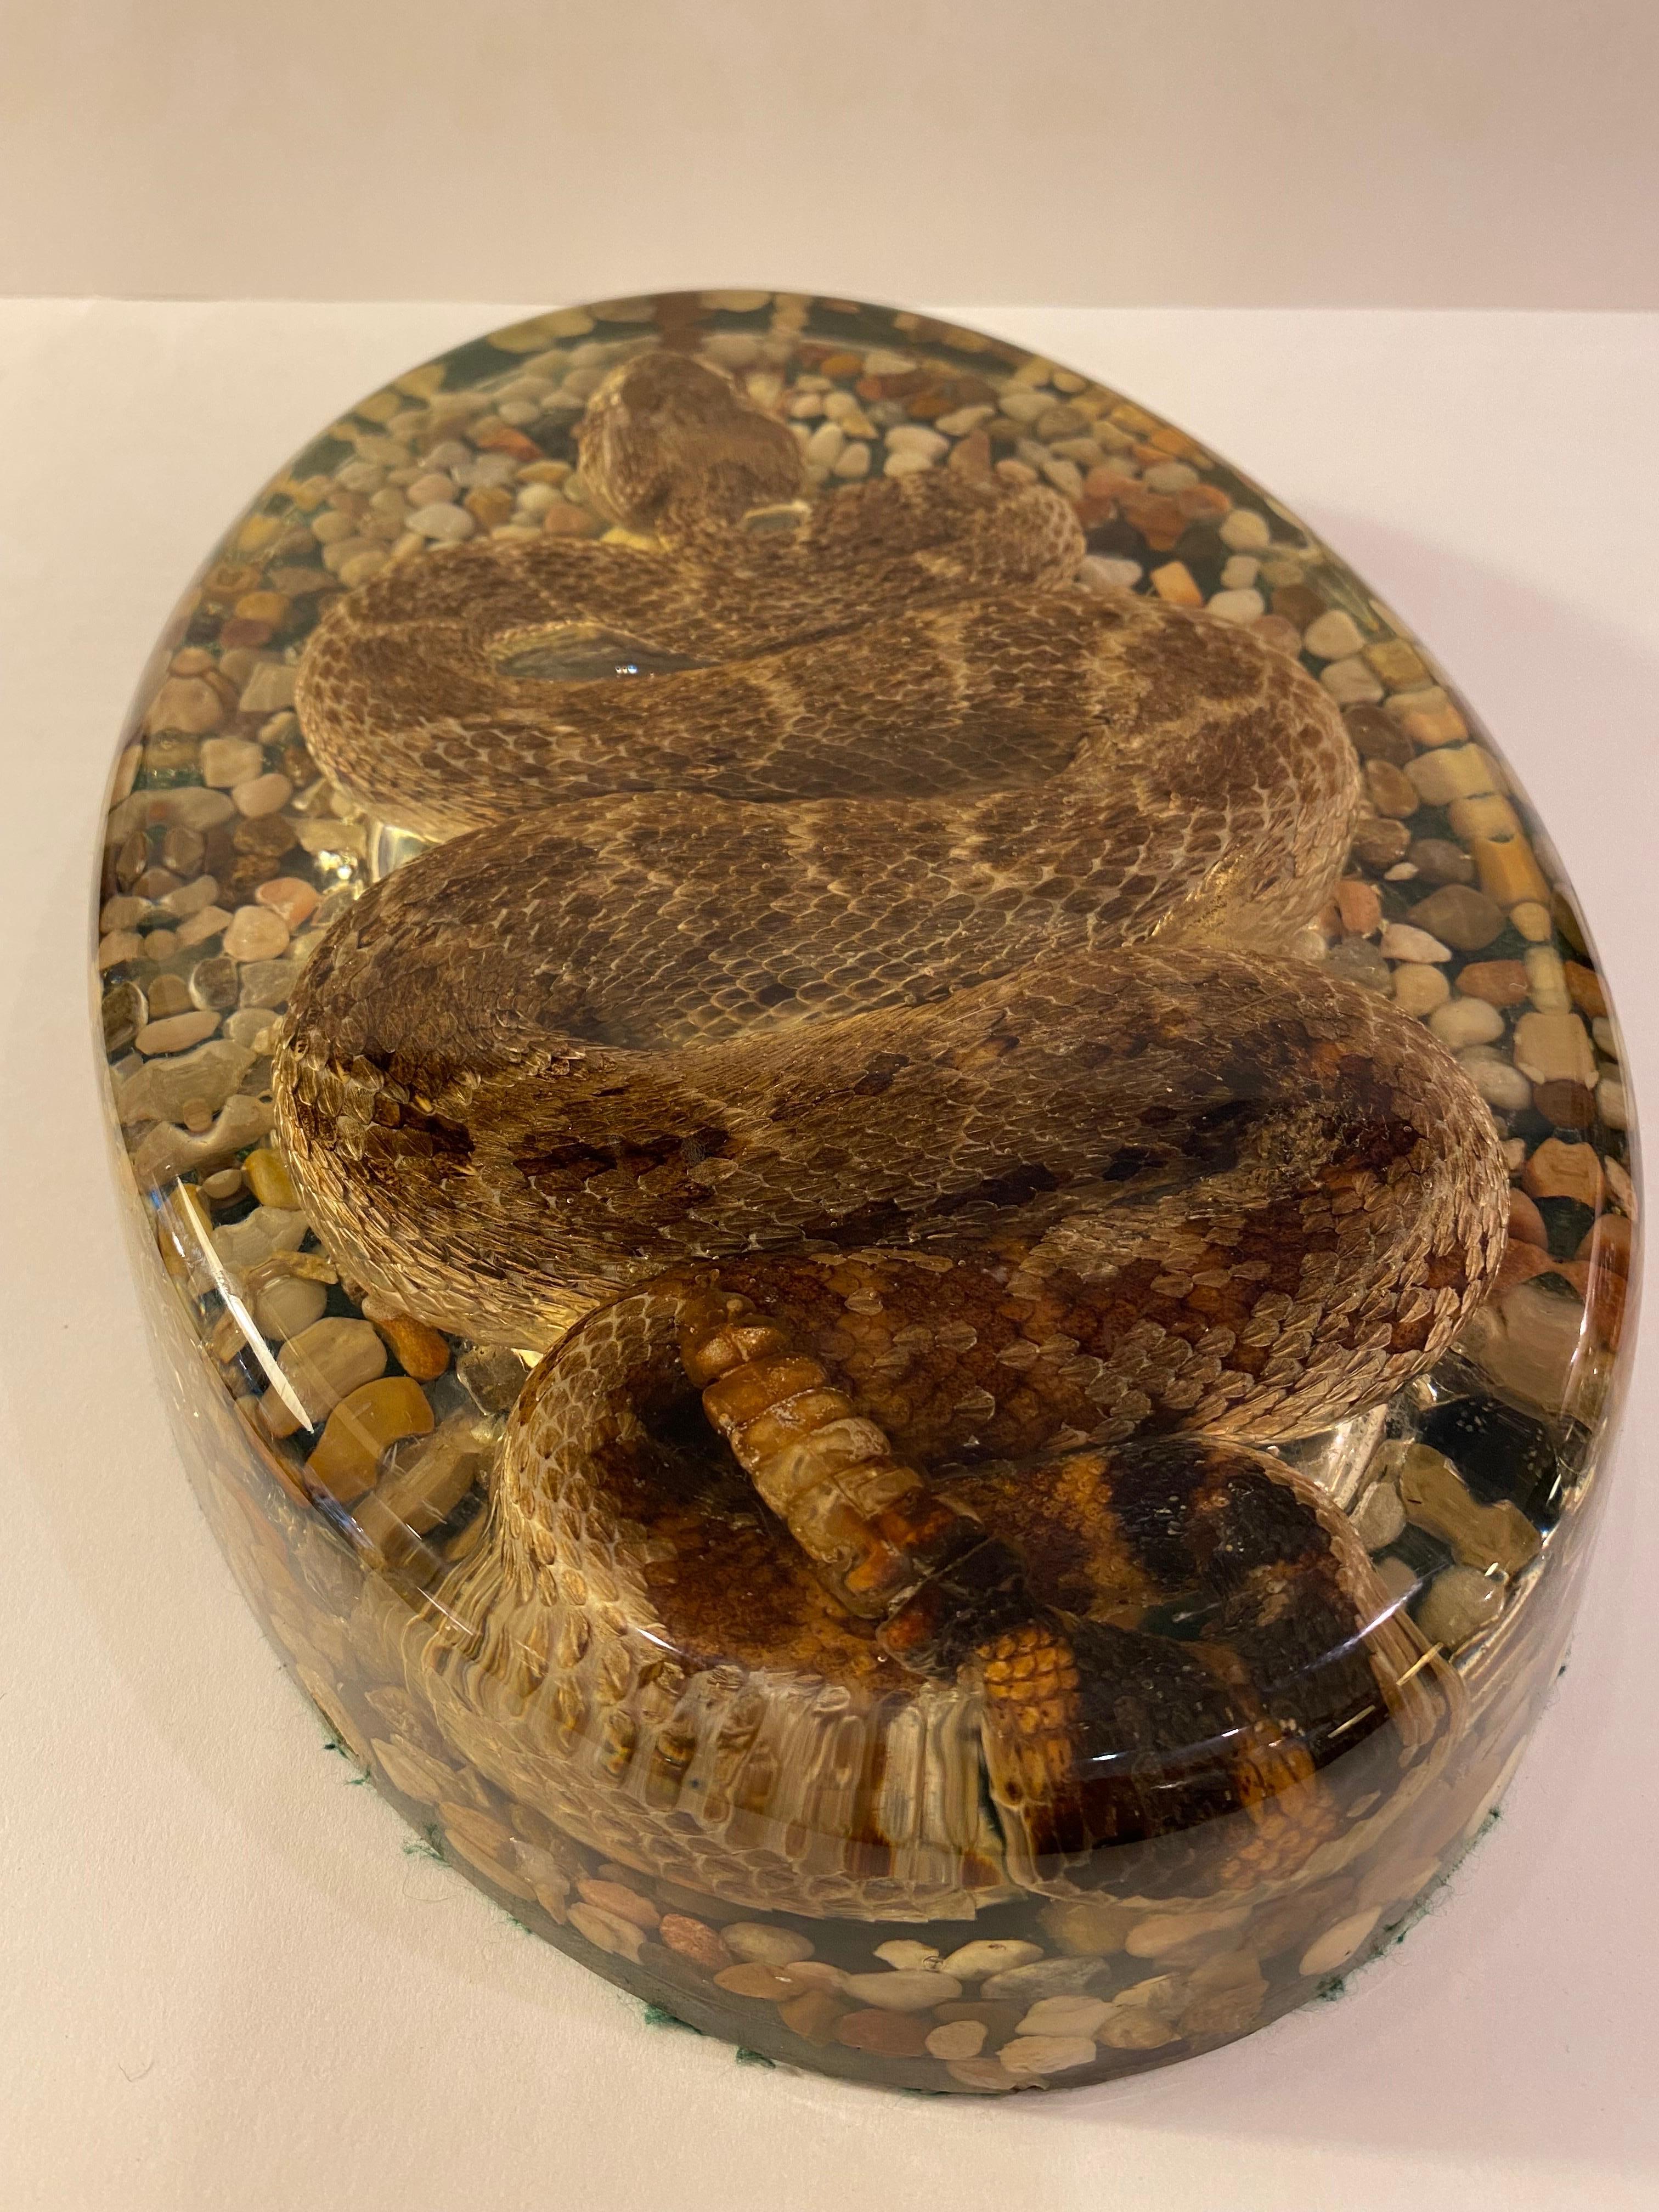 Rattlesnake in Resin paperweight or object! Nice scale and size! Makes a statement on that desk or table. Snake is curled back and forth with a gravel bottom.